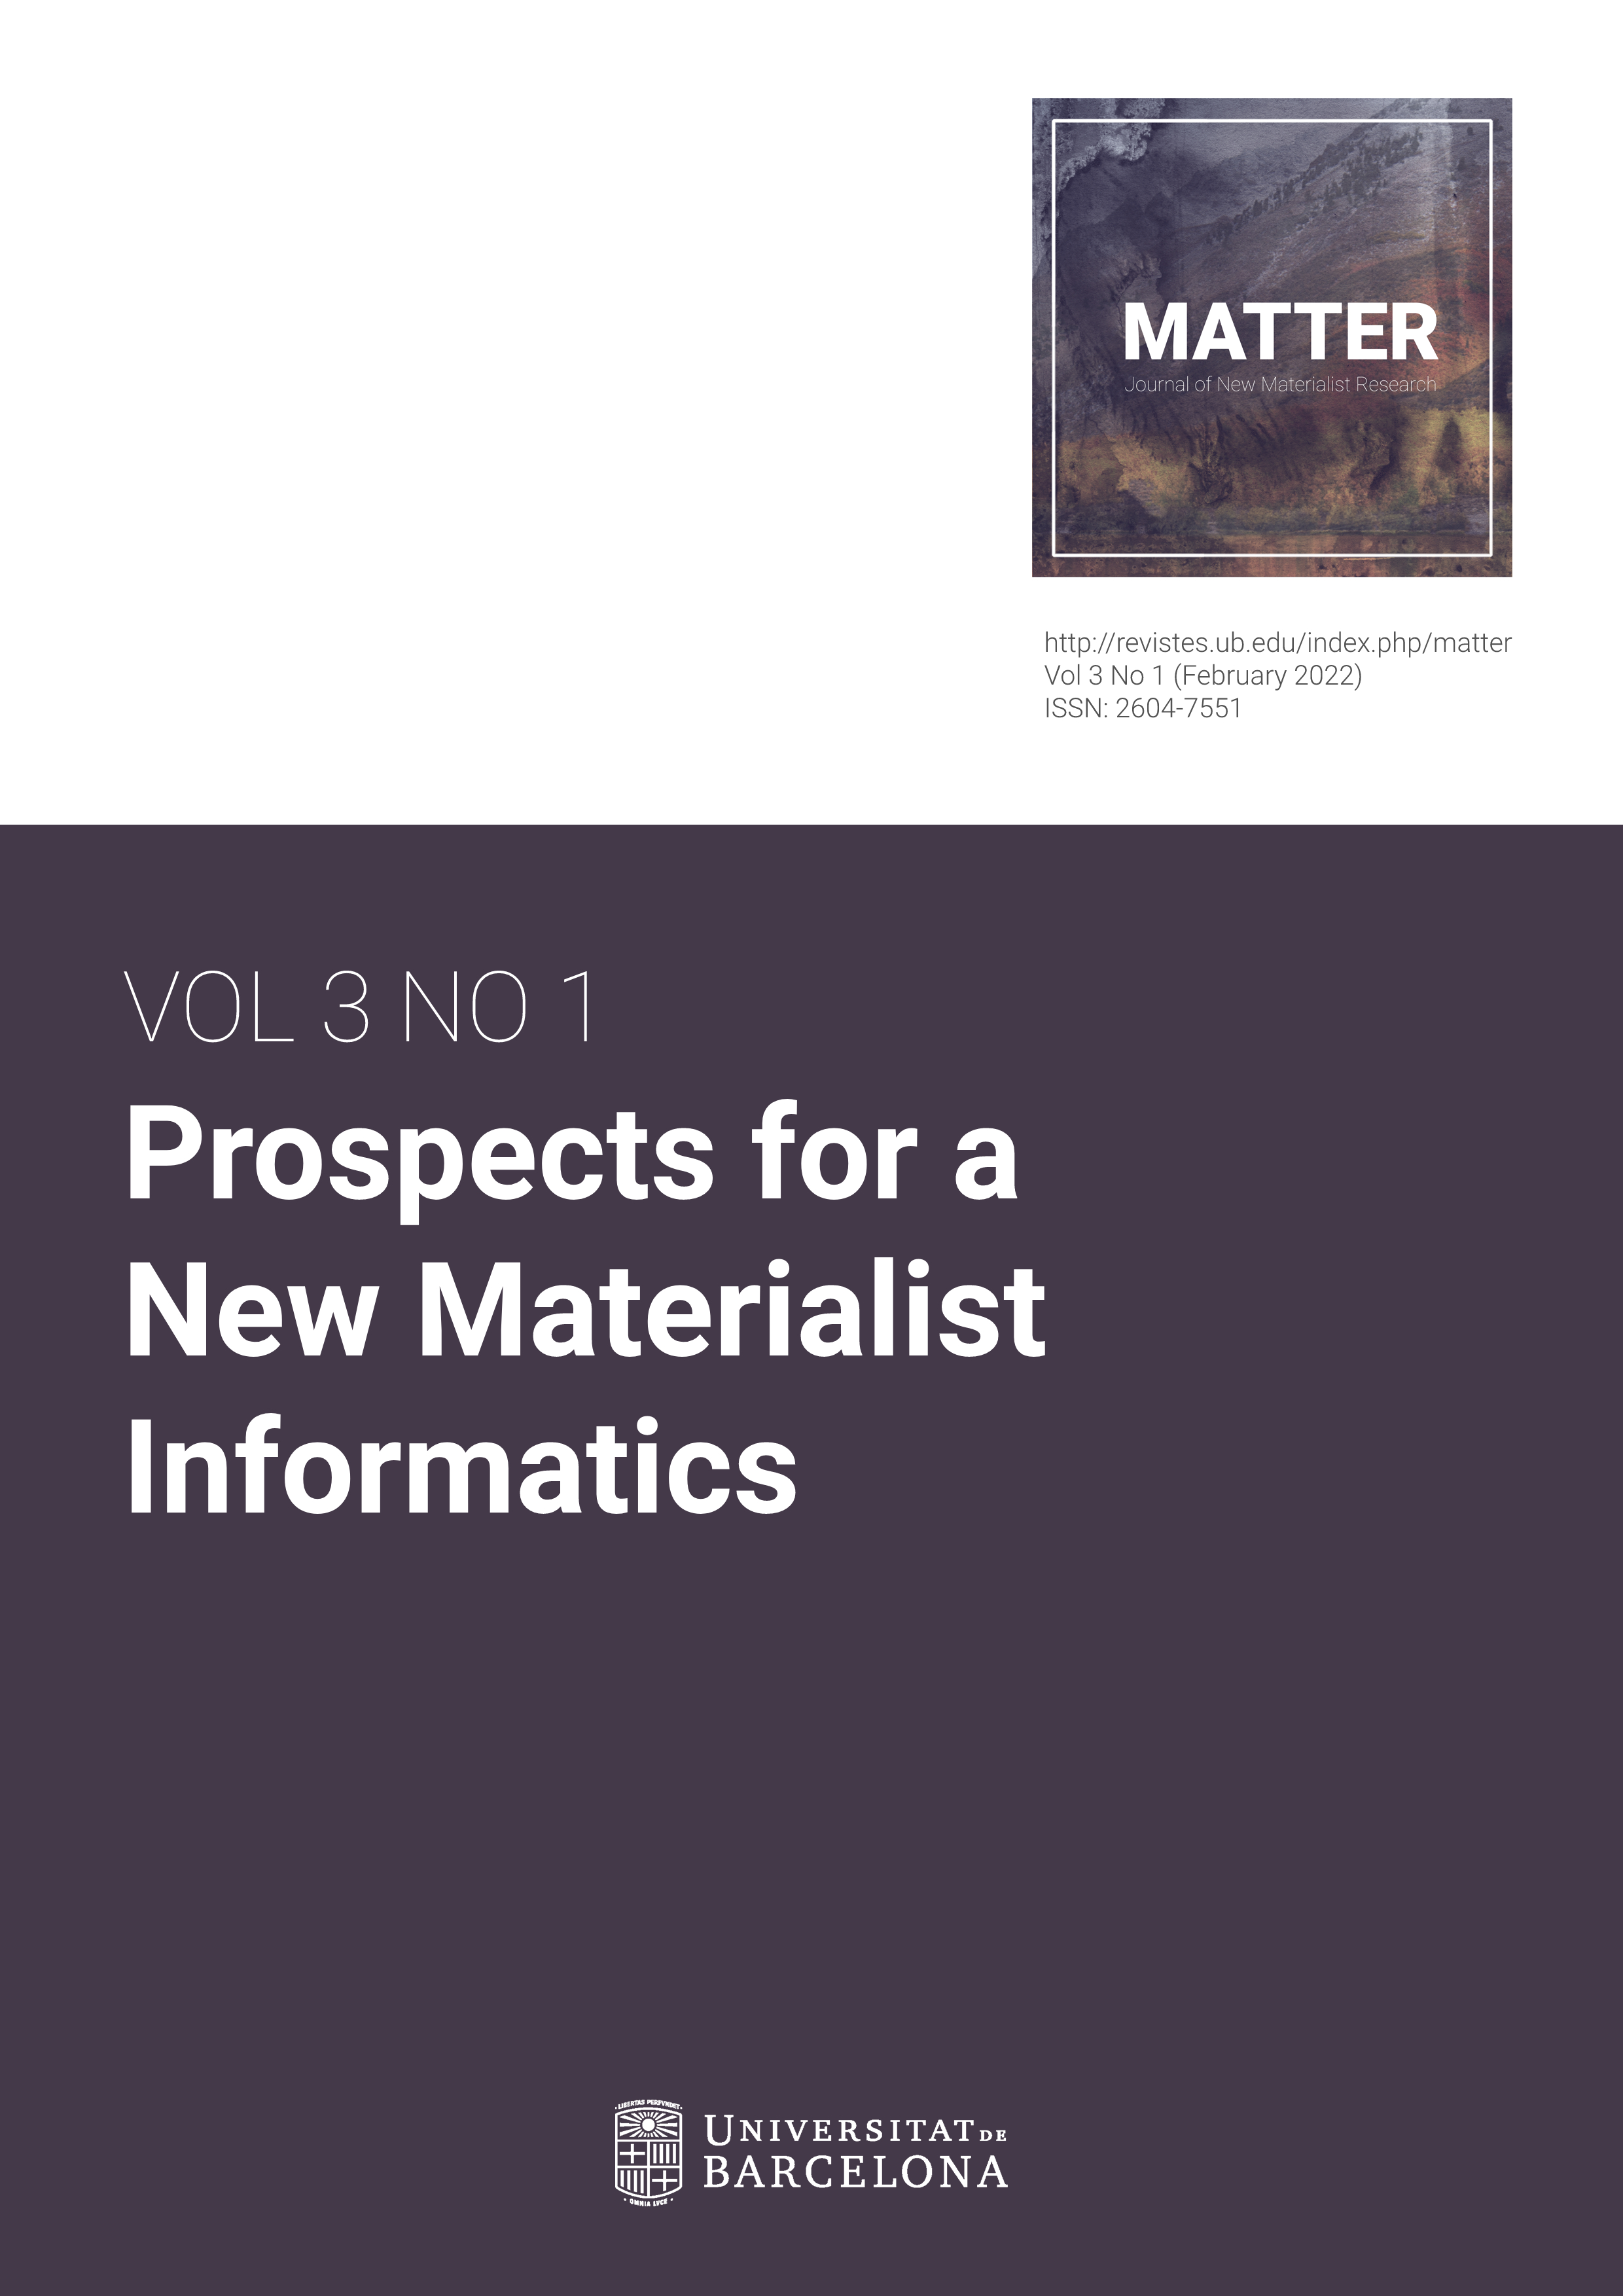 					View Vol. 3 No. 1 (2022): Prospects for a New Materialist Informatics
				